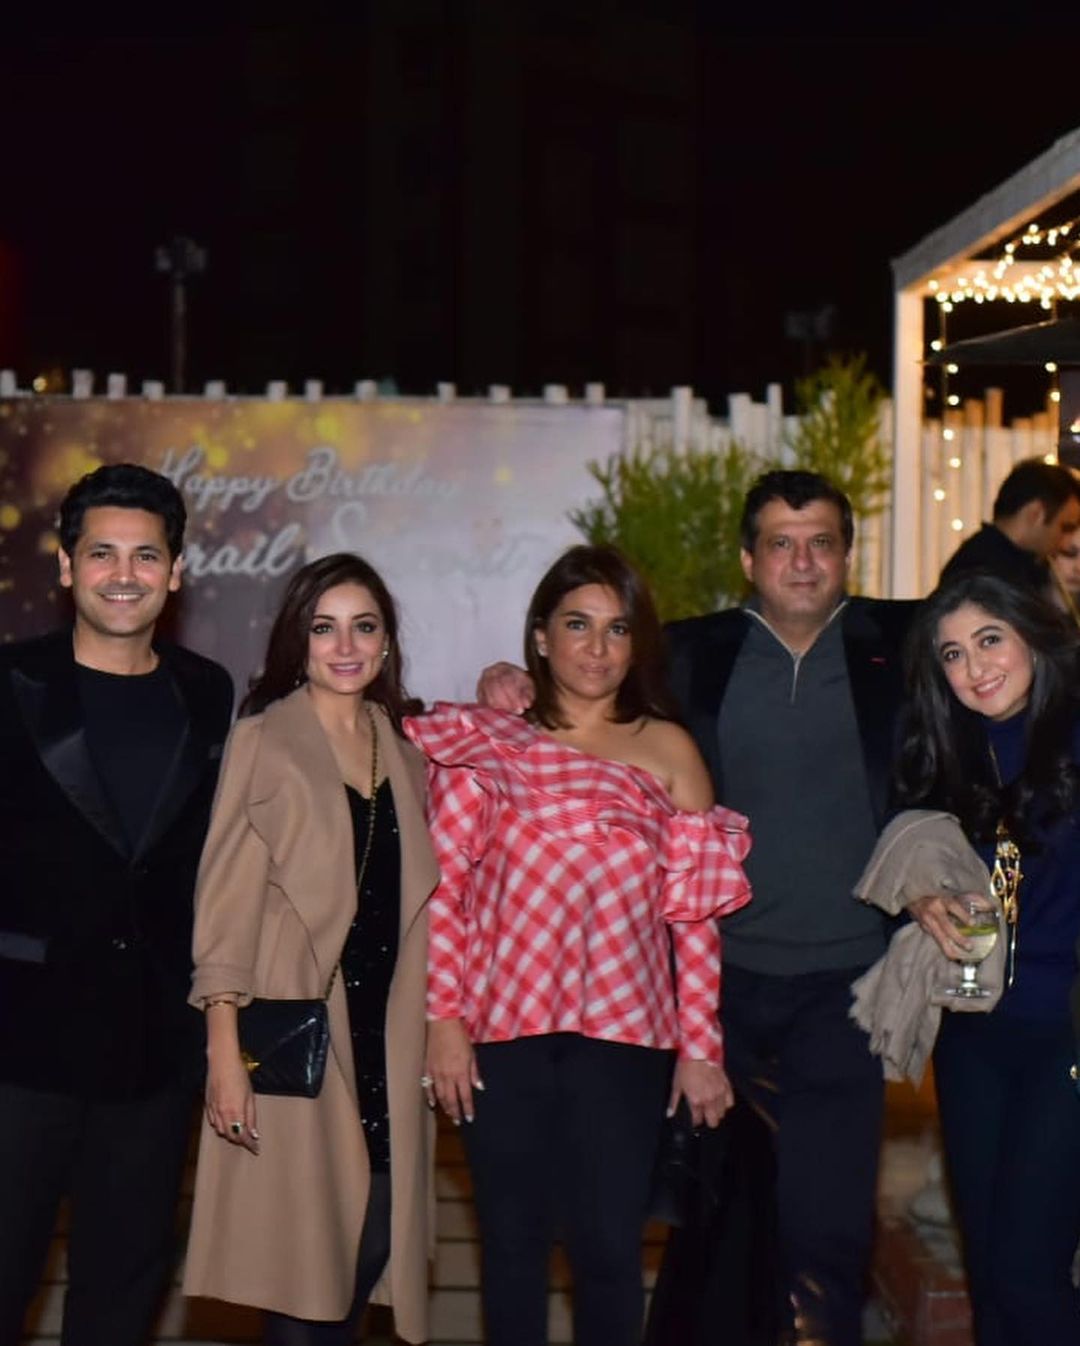 Sarwat Gilani Celebrated Her Birthday with Friends - Beautiful Pictures